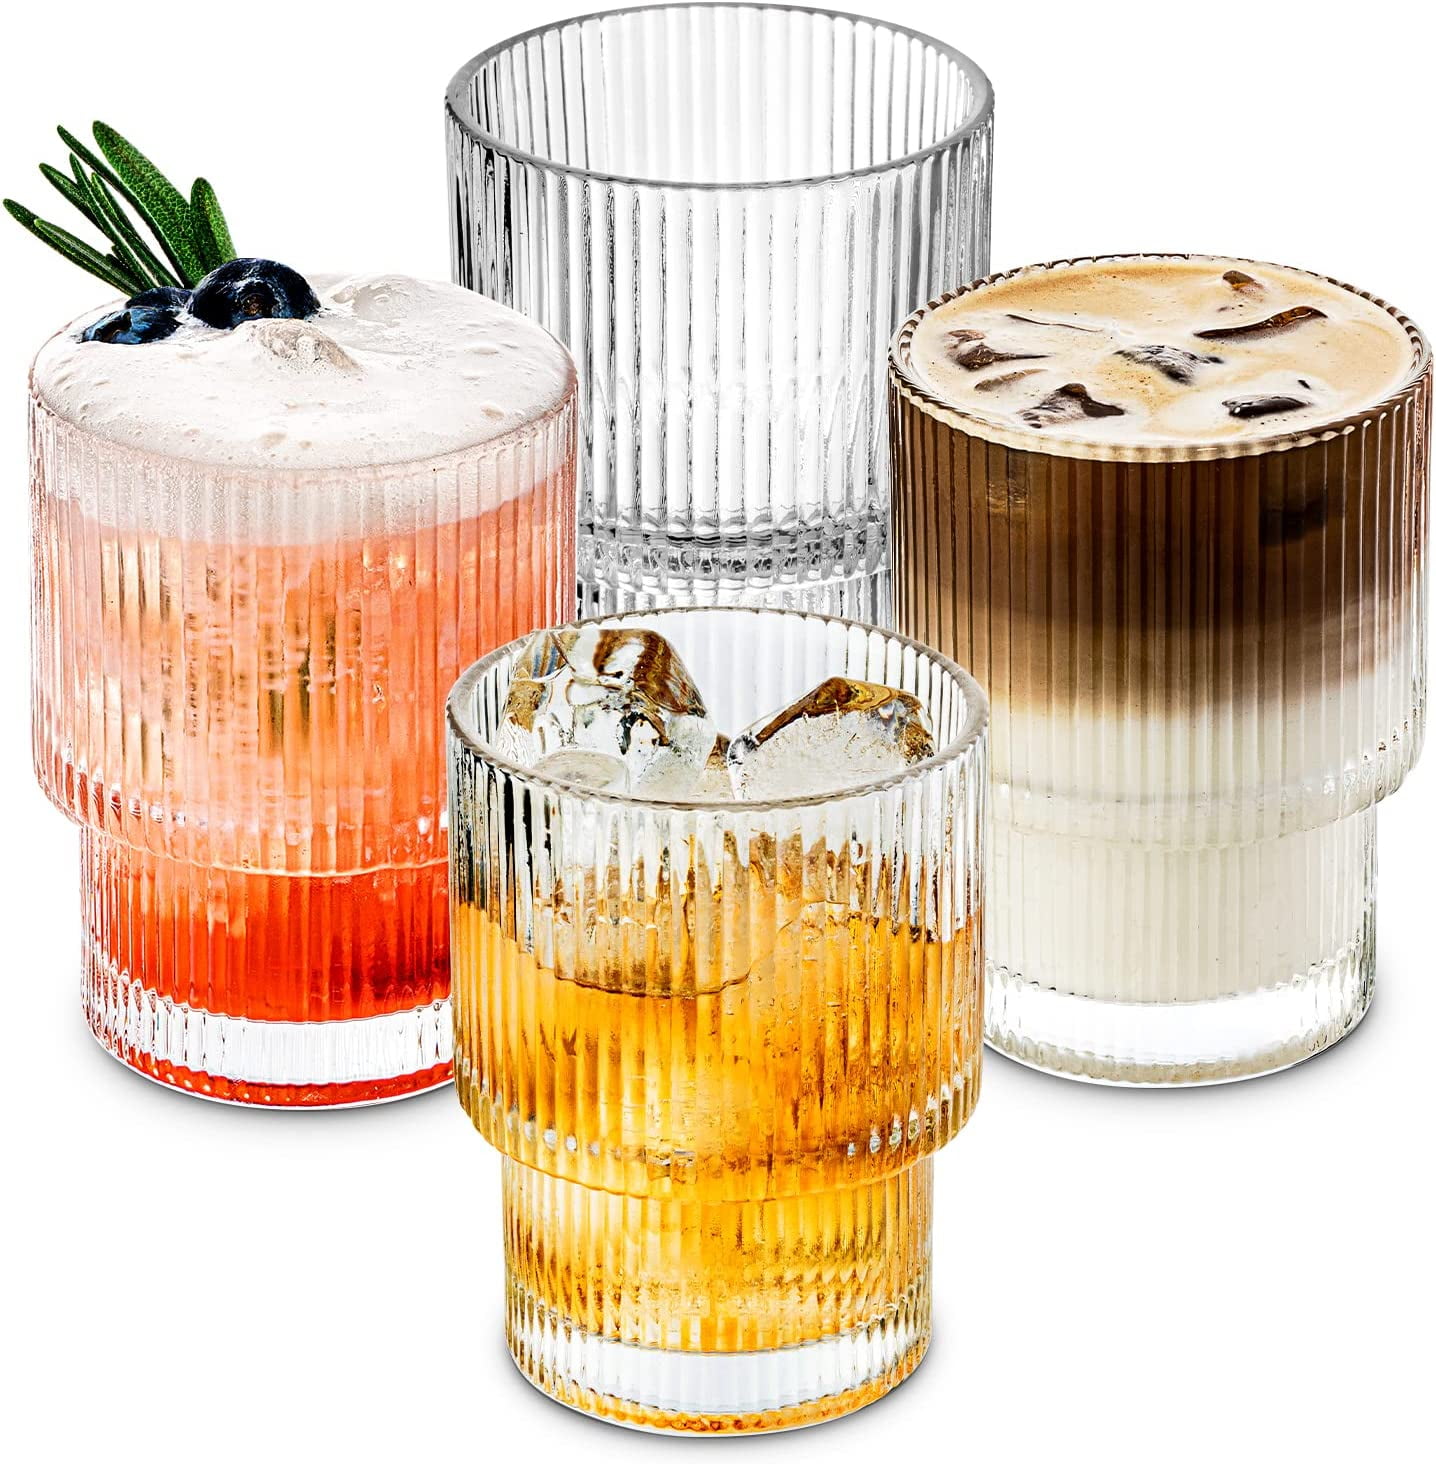 FINFINLIFE Ribbed Glass Cups with Lids and Straws - 16oz Ribbed Drinking  Glasses Set of 6, Bamboo Li…See more FINFINLIFE Ribbed Glass Cups with Lids